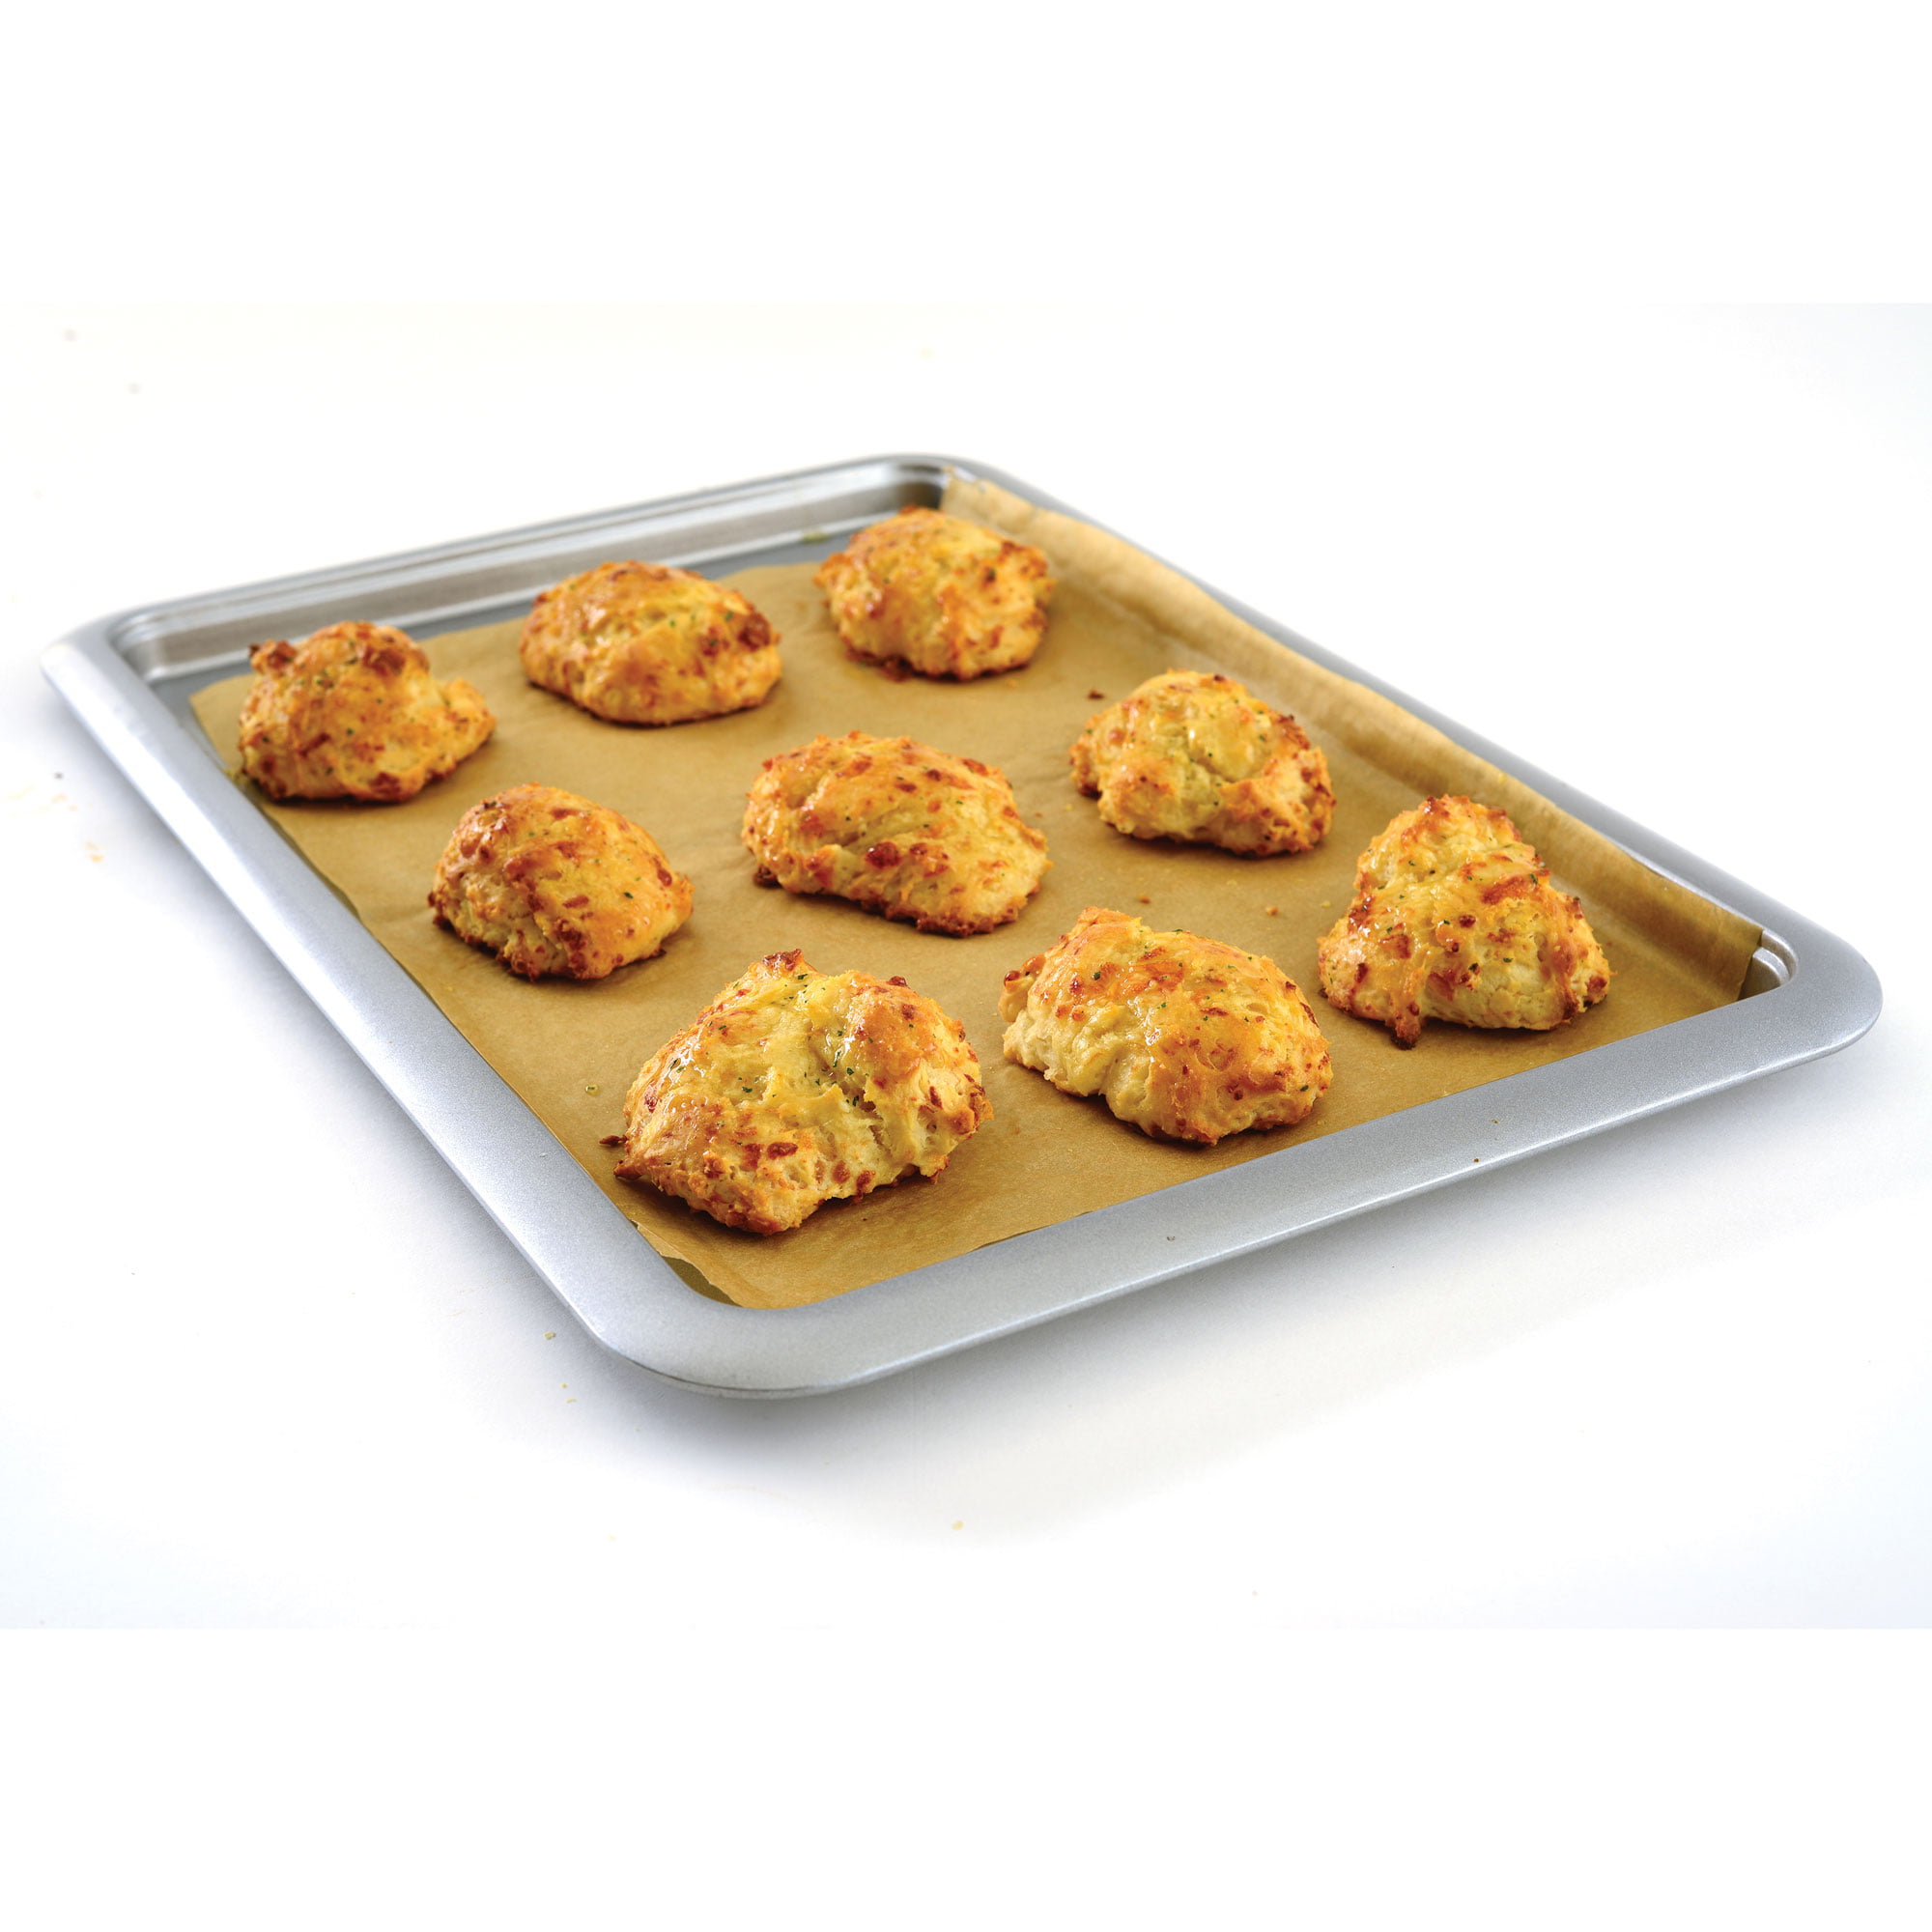 Norpro Stainless Steel Baking Sheet – The Cook's Nook